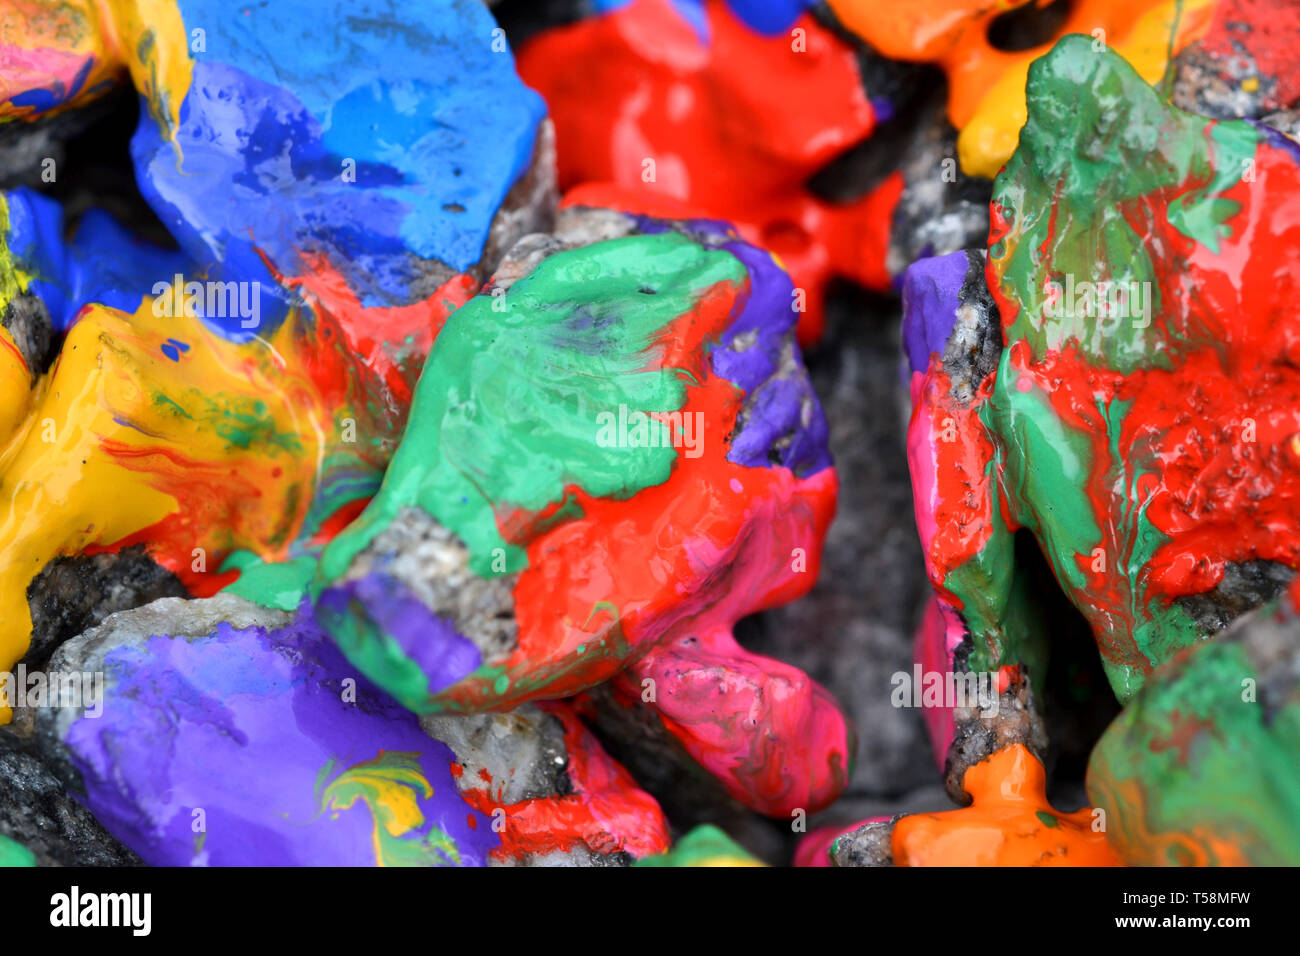 stones with colorful paint. Abstract background colored stones randomly in different colors Stock Photo